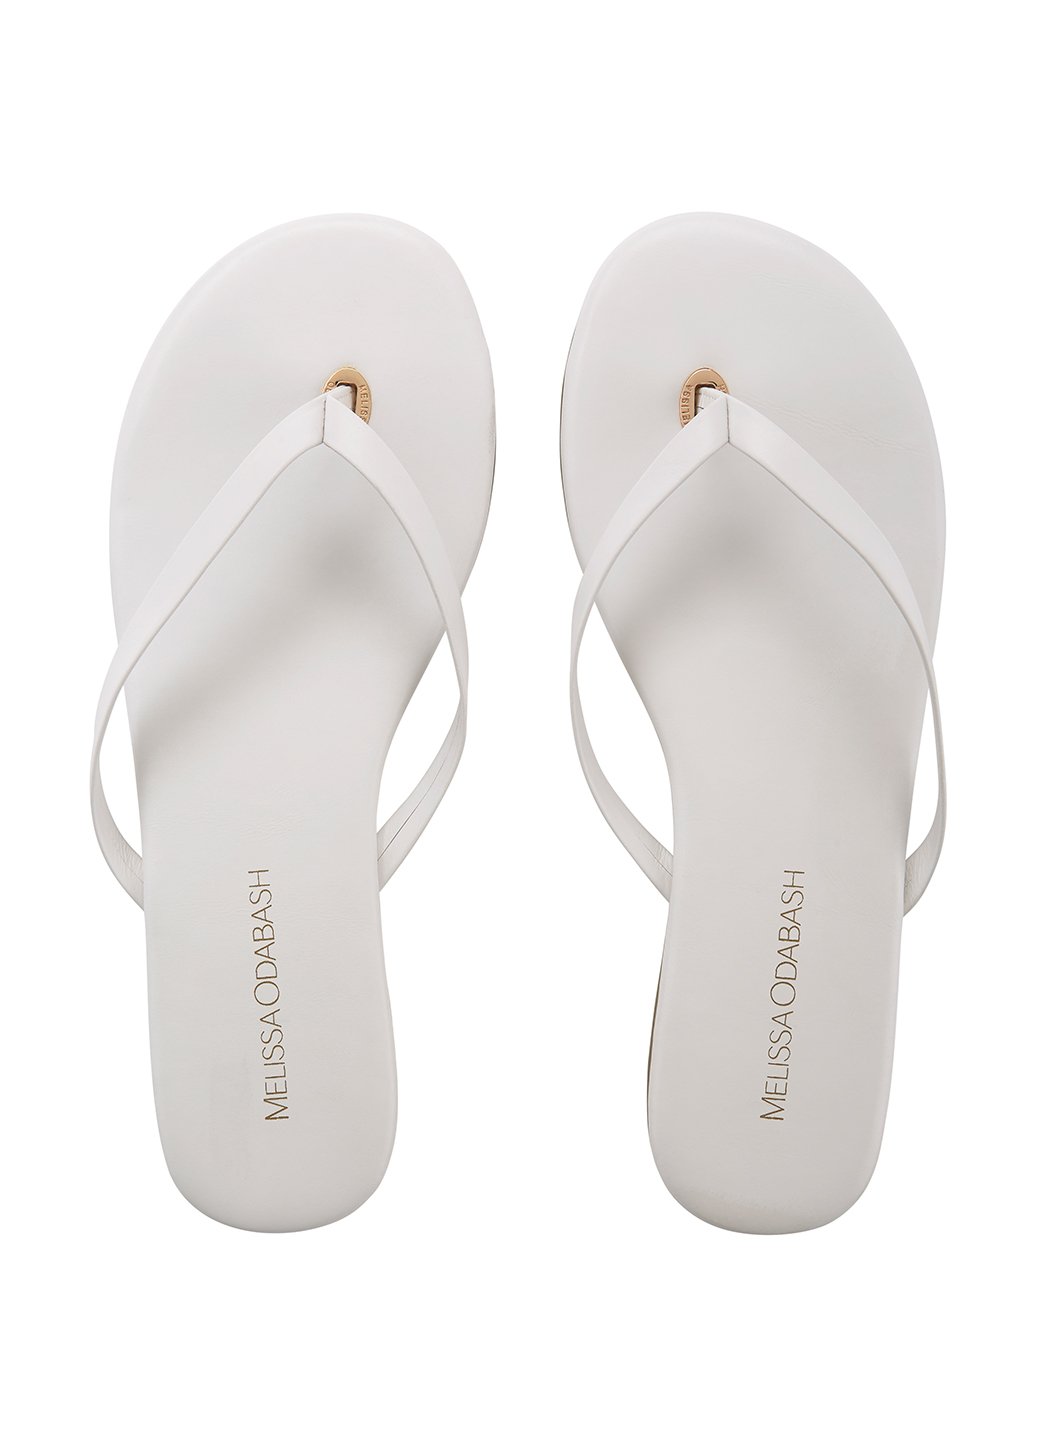 flip flop leather white 2019